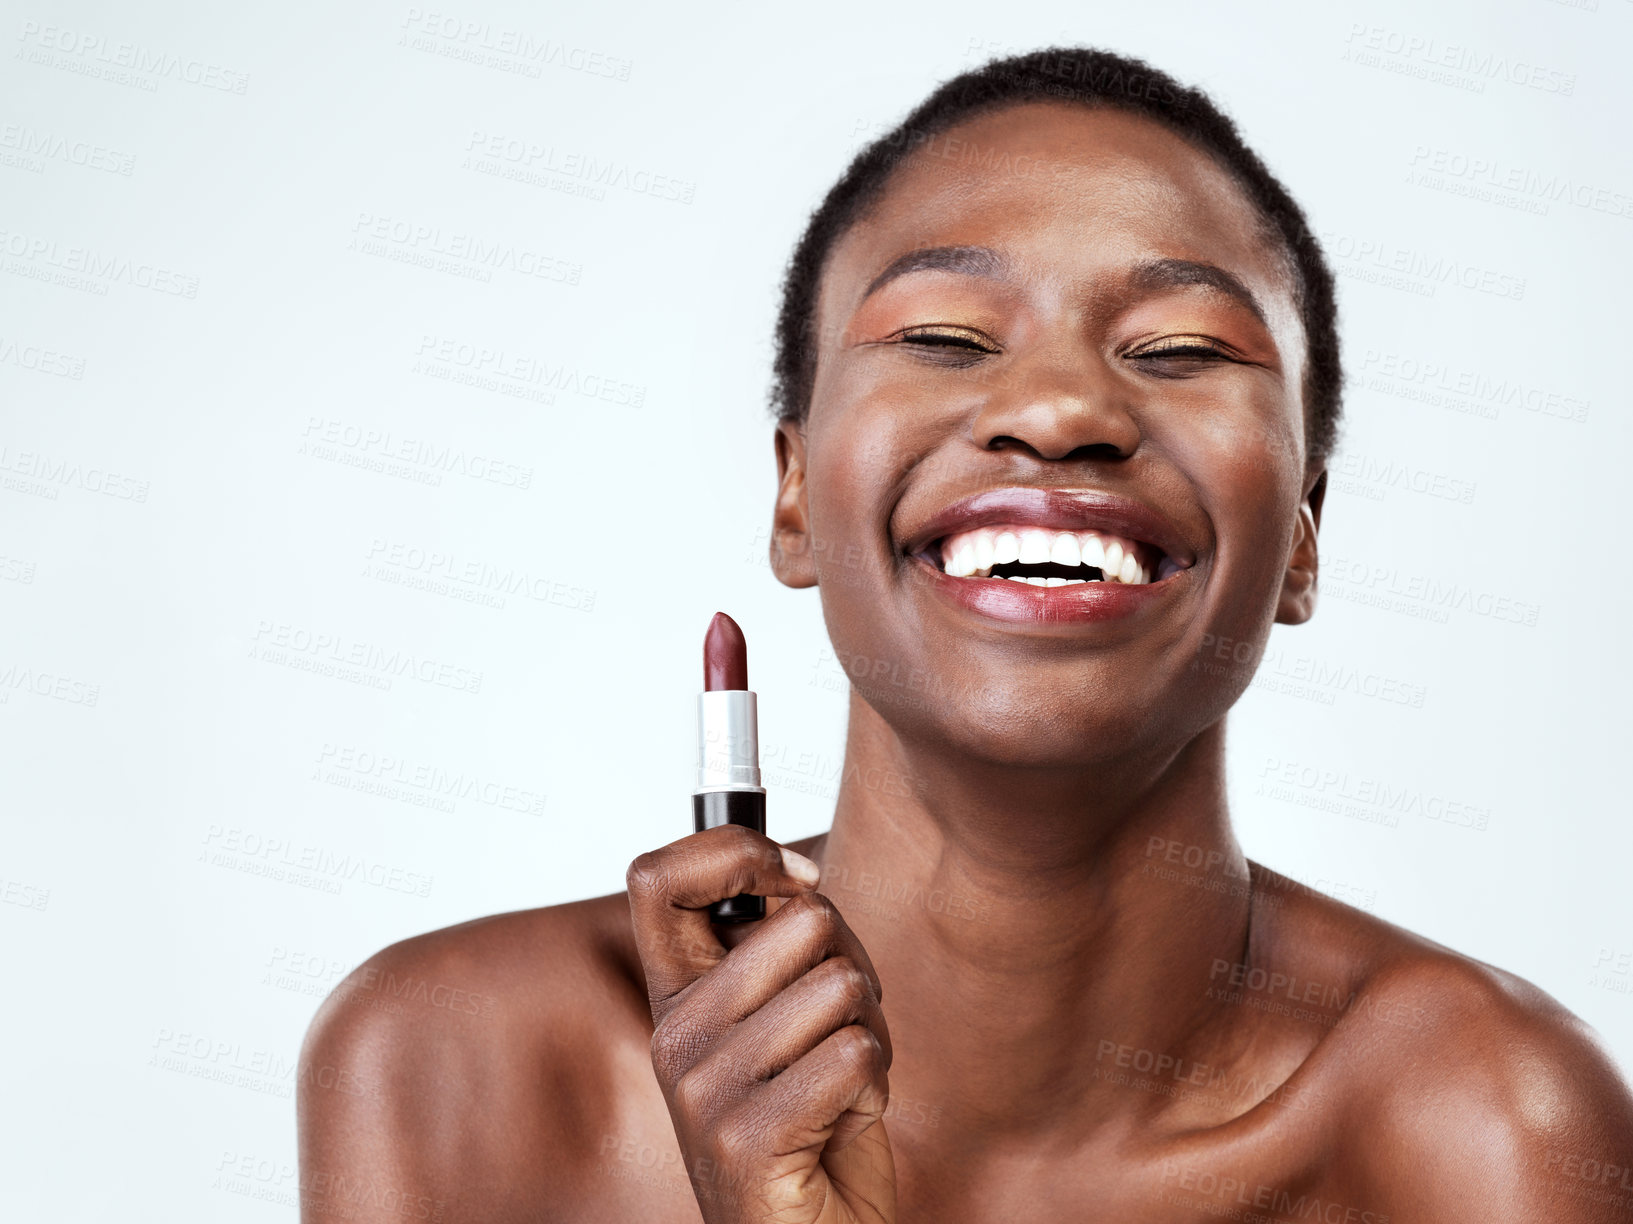 Buy stock photo Studio shot of a beautiful young woman applying red lipstick against a grey background